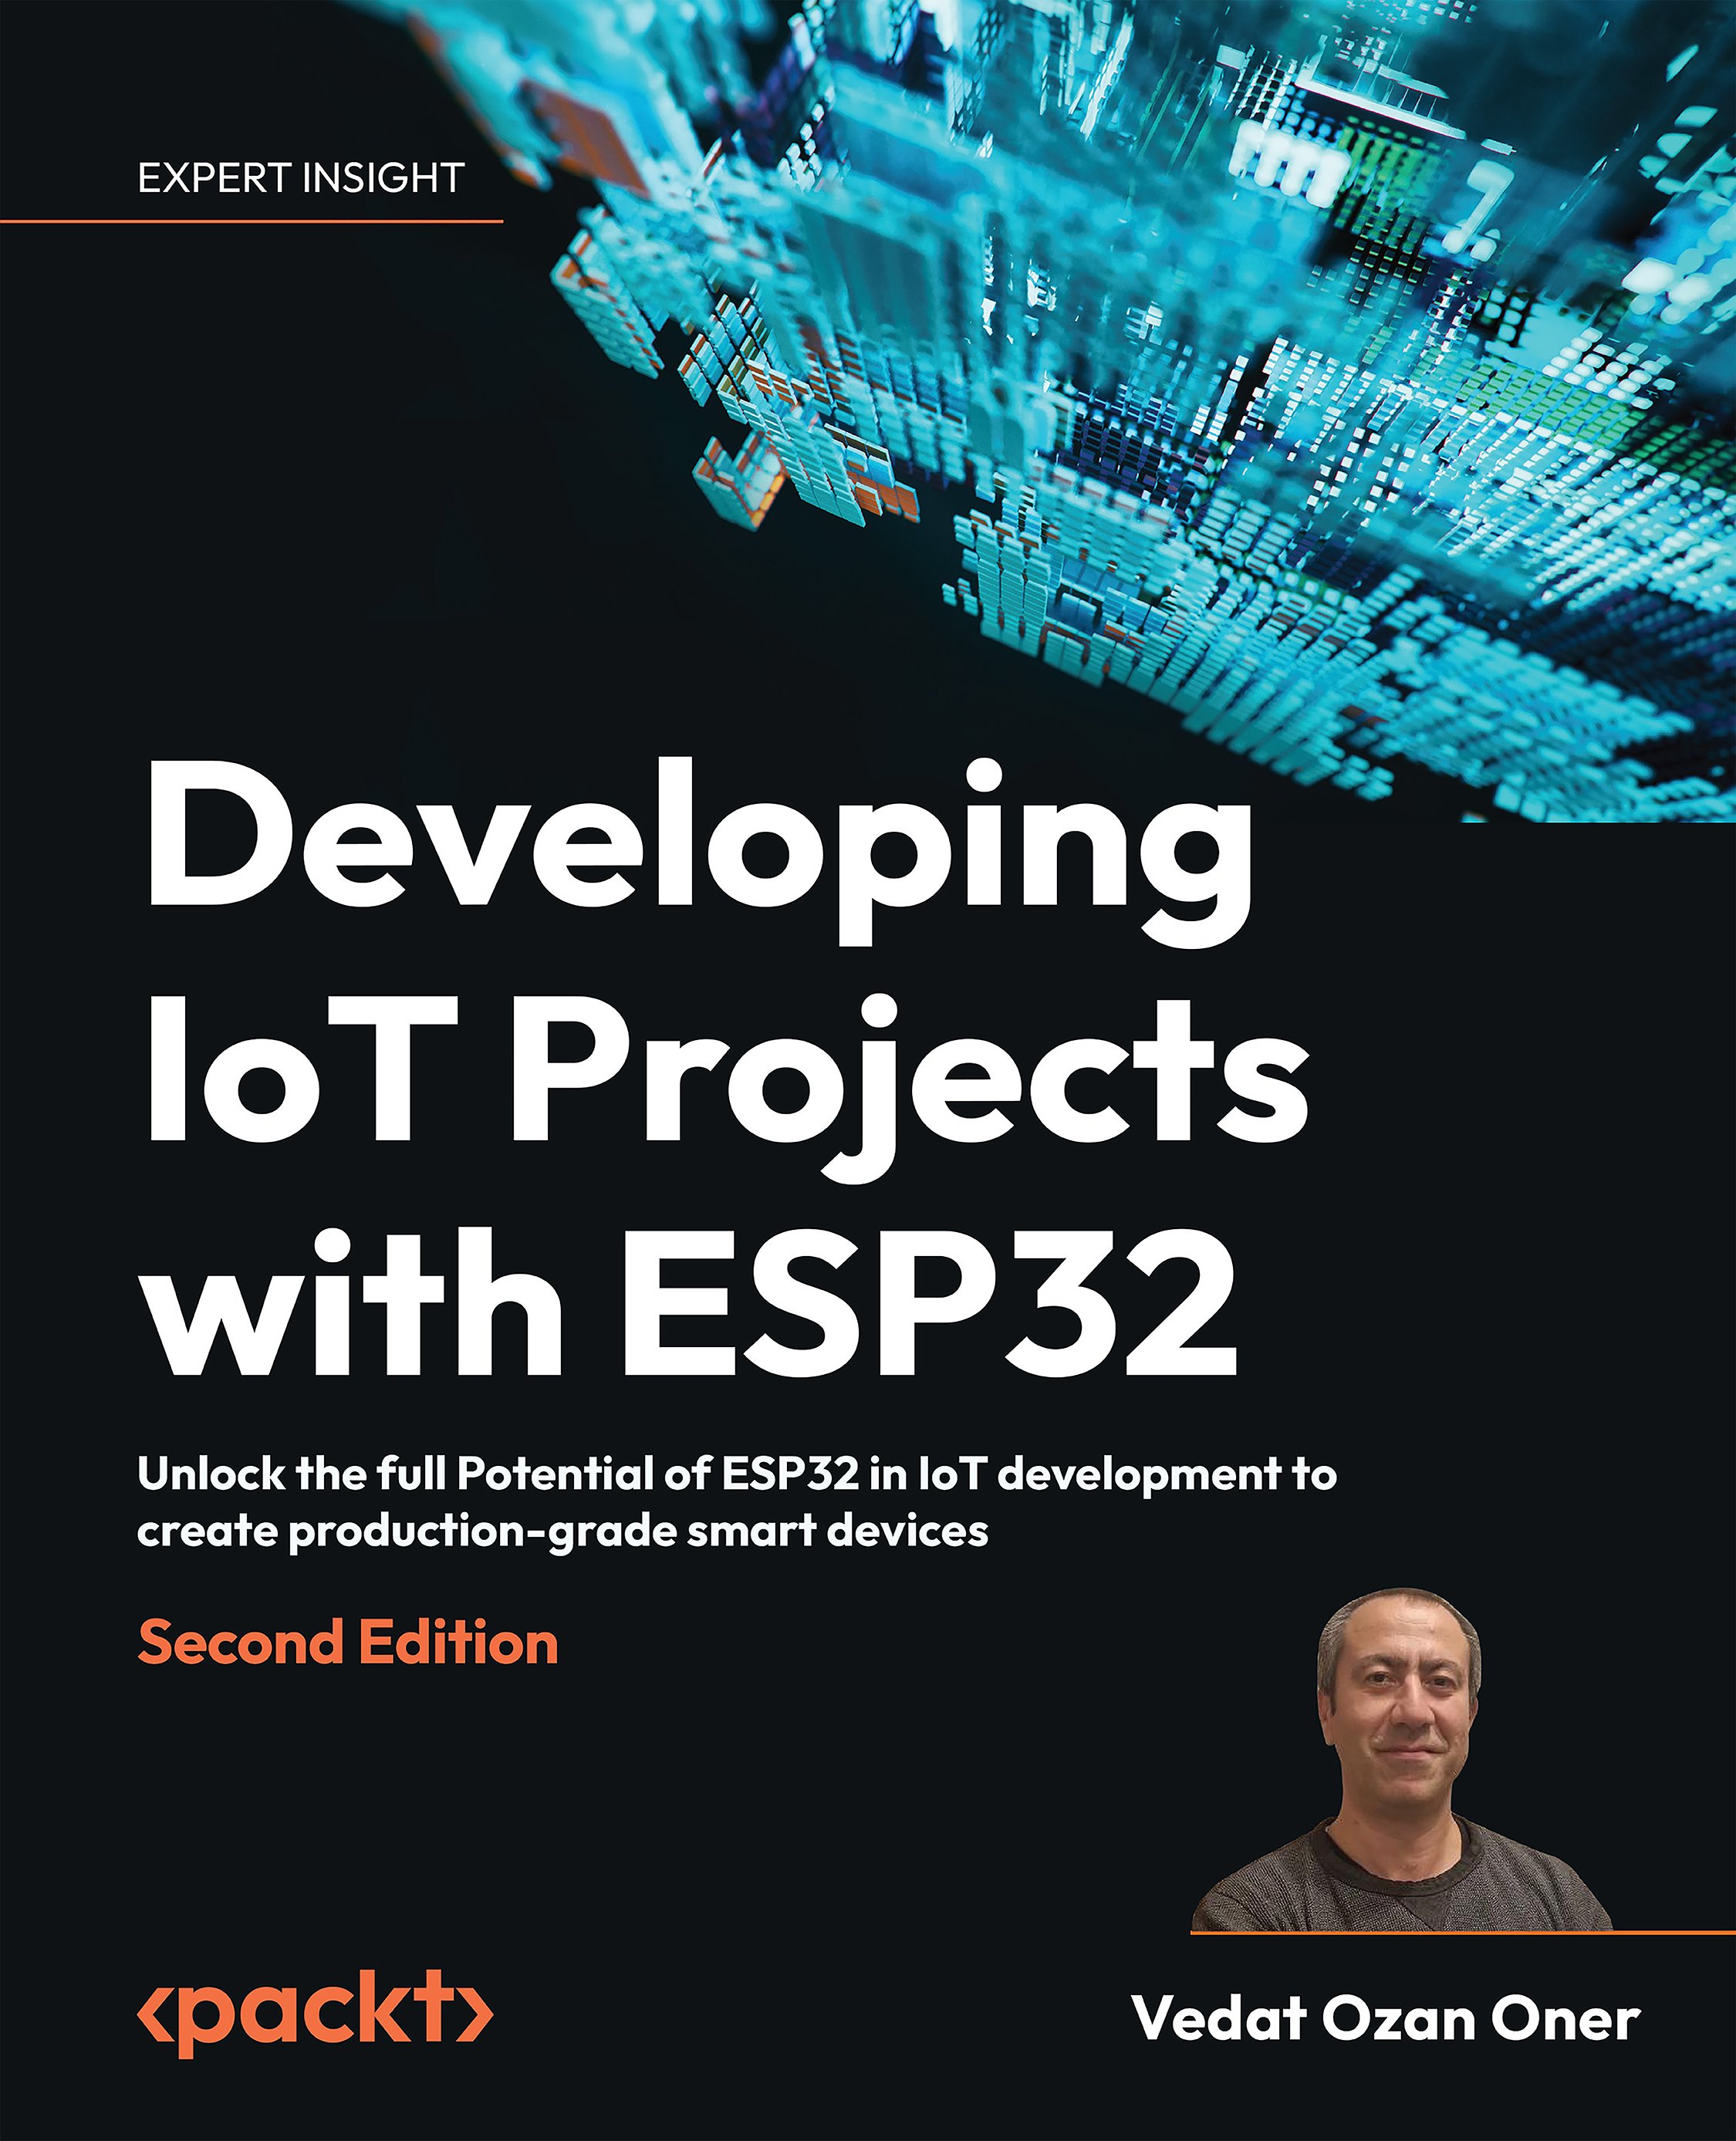 Developing IoT Projects with ESP32: Unlock the full Potential of ESP32 in IoT development to create production-grade smart devices, Second Edition